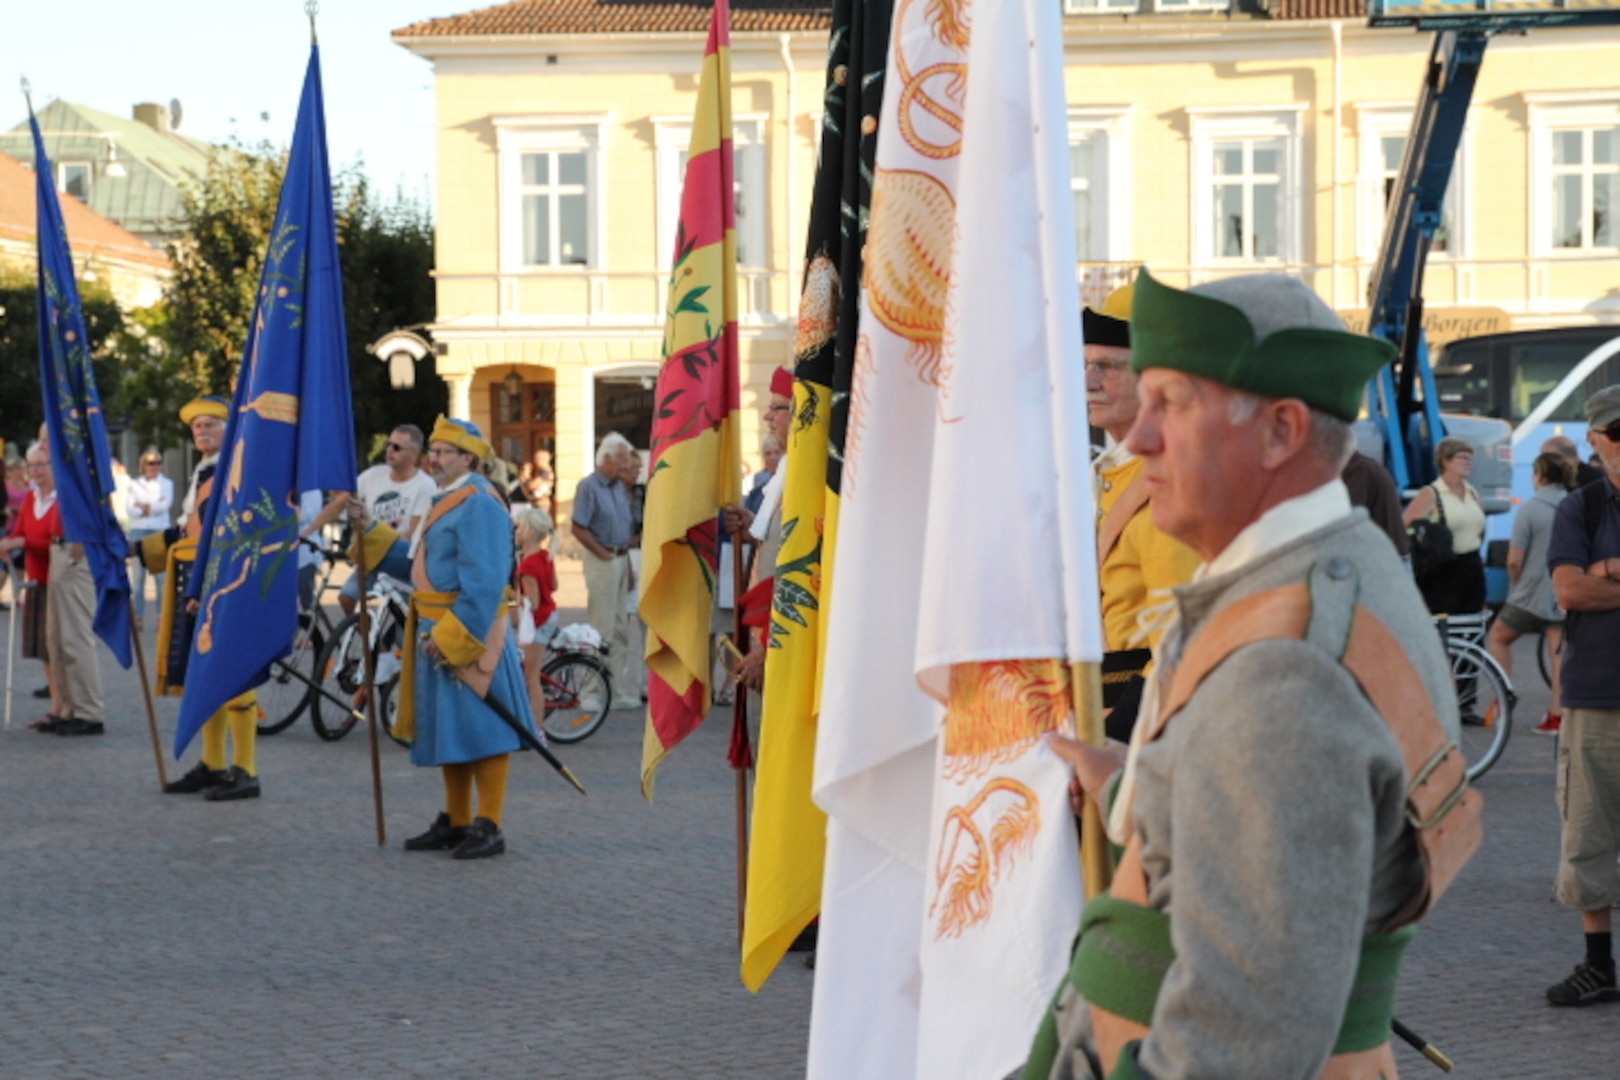 Opening Ceremony of the 2013 CISM World Orienteering Military Championship hosted by the Swedish Armed Forces in Eksjo, Sweden from 26 August to 1 September.